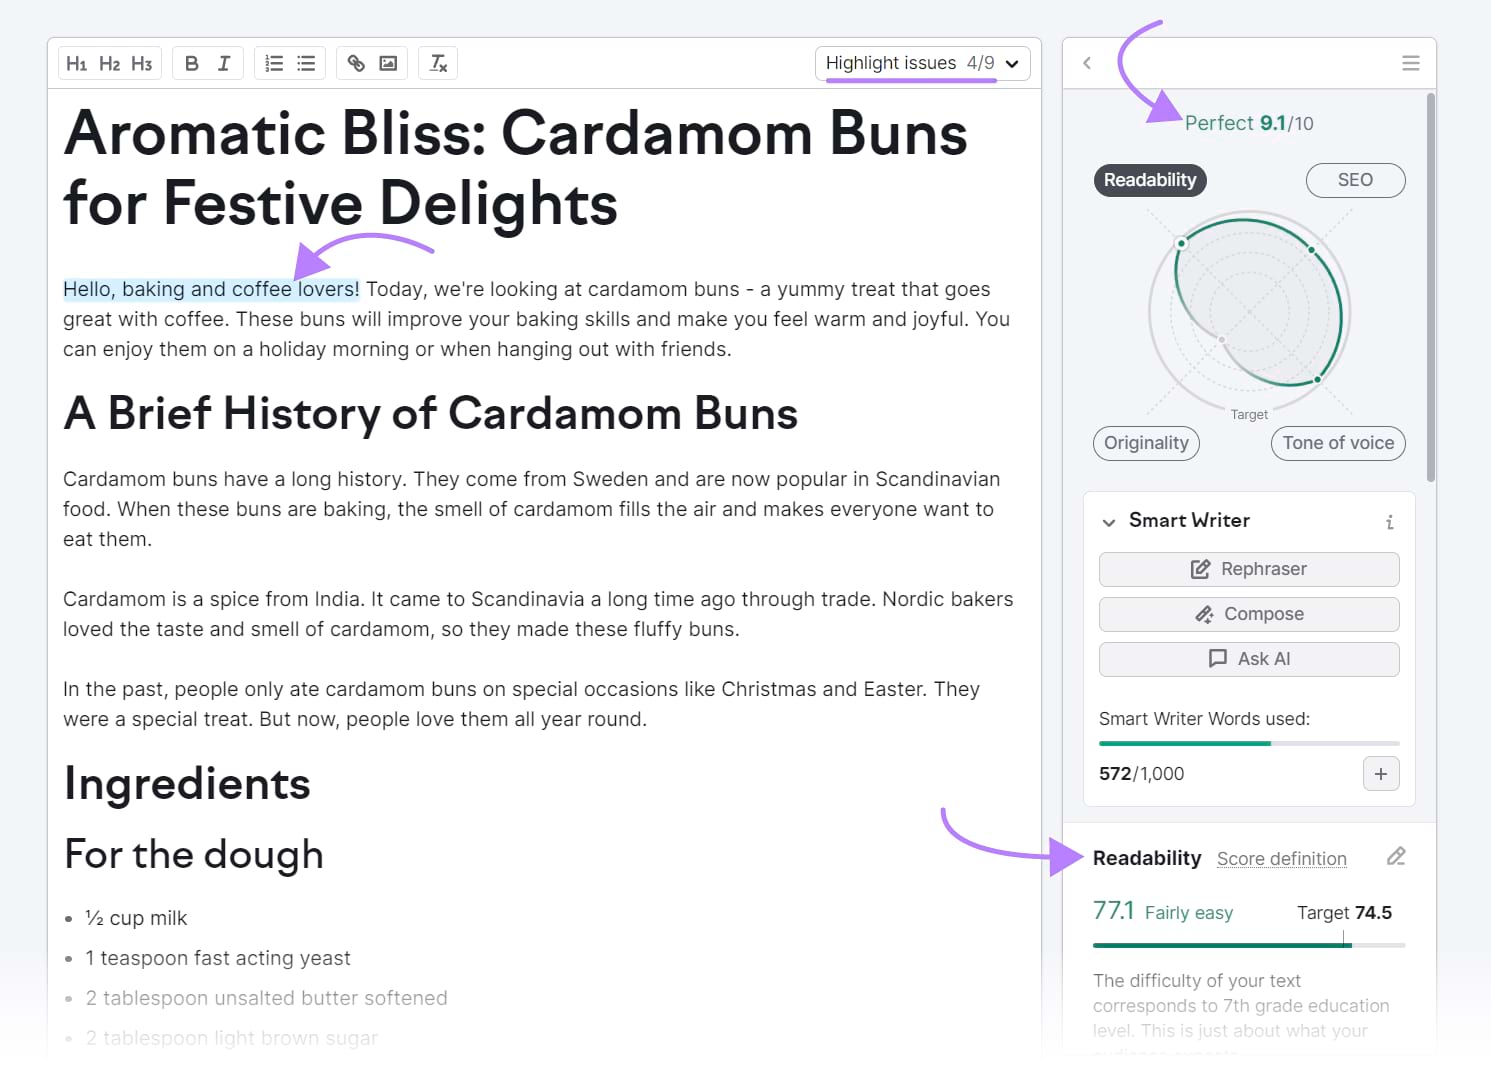 Examples of SEO Writing Assistant's suggestions on an article titled "Aromatic Bliss: Cardamom Buns for Festive Delights"